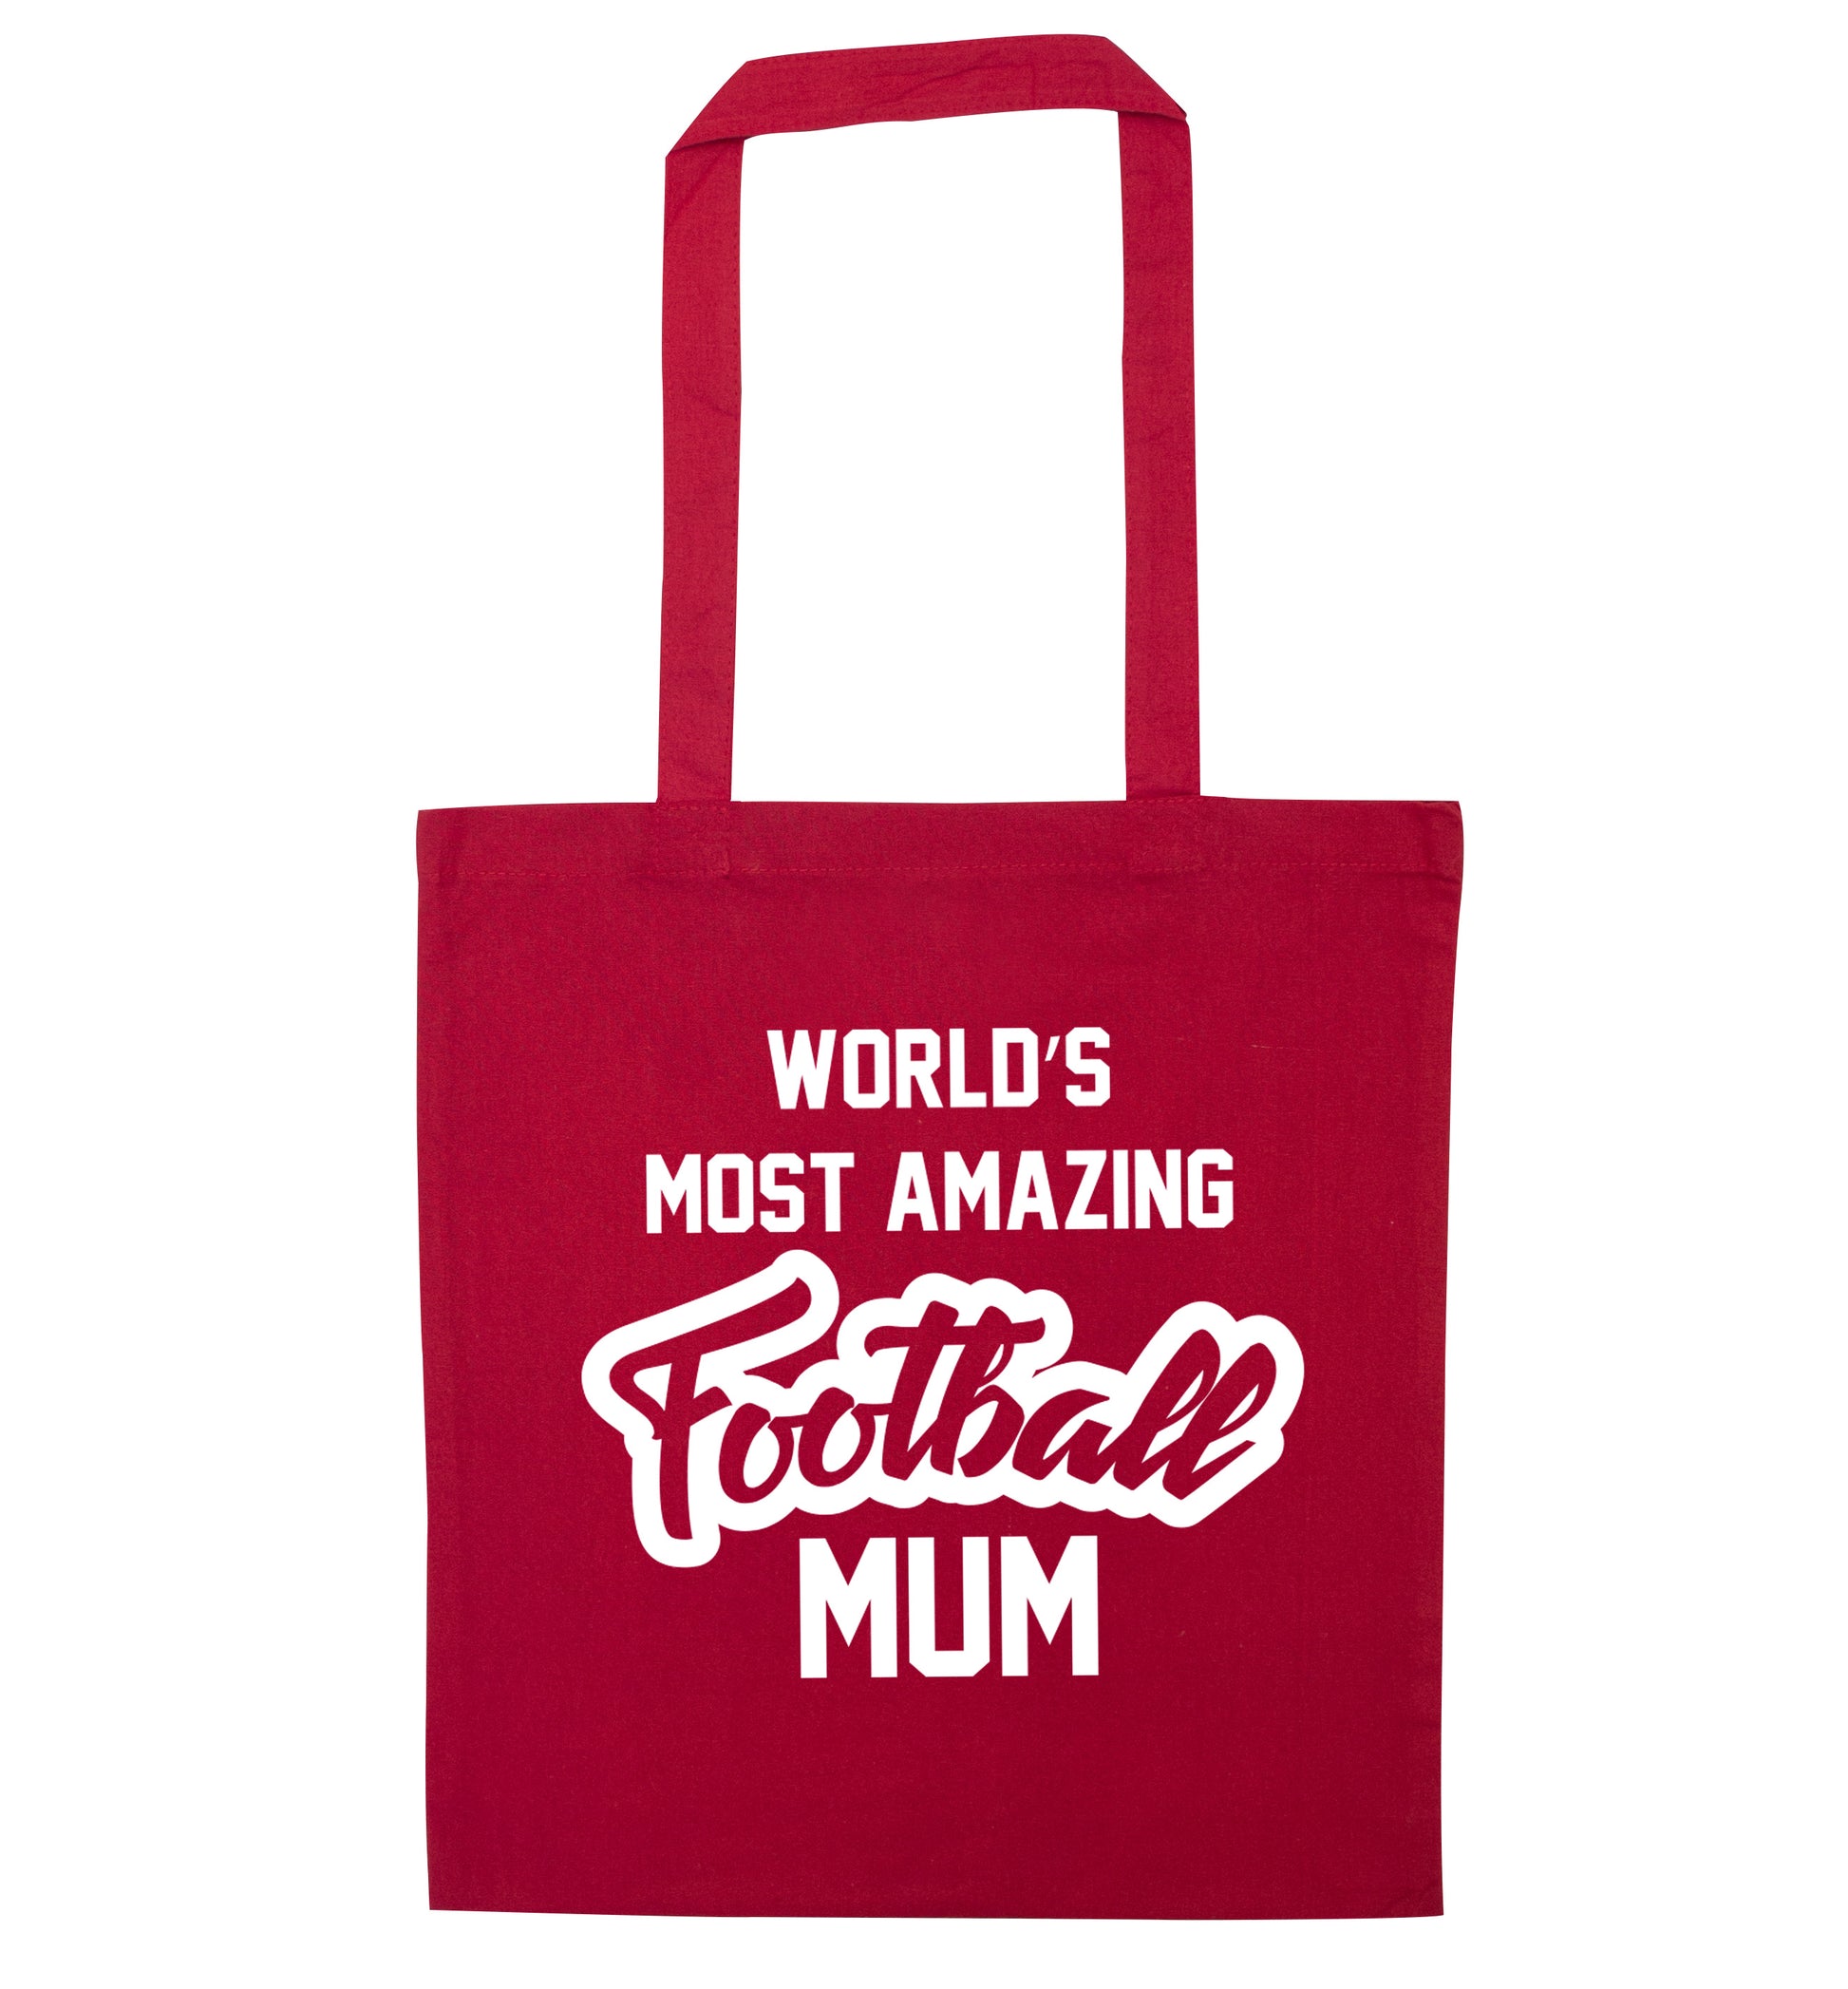 Worlds most amazing football mum red tote bag